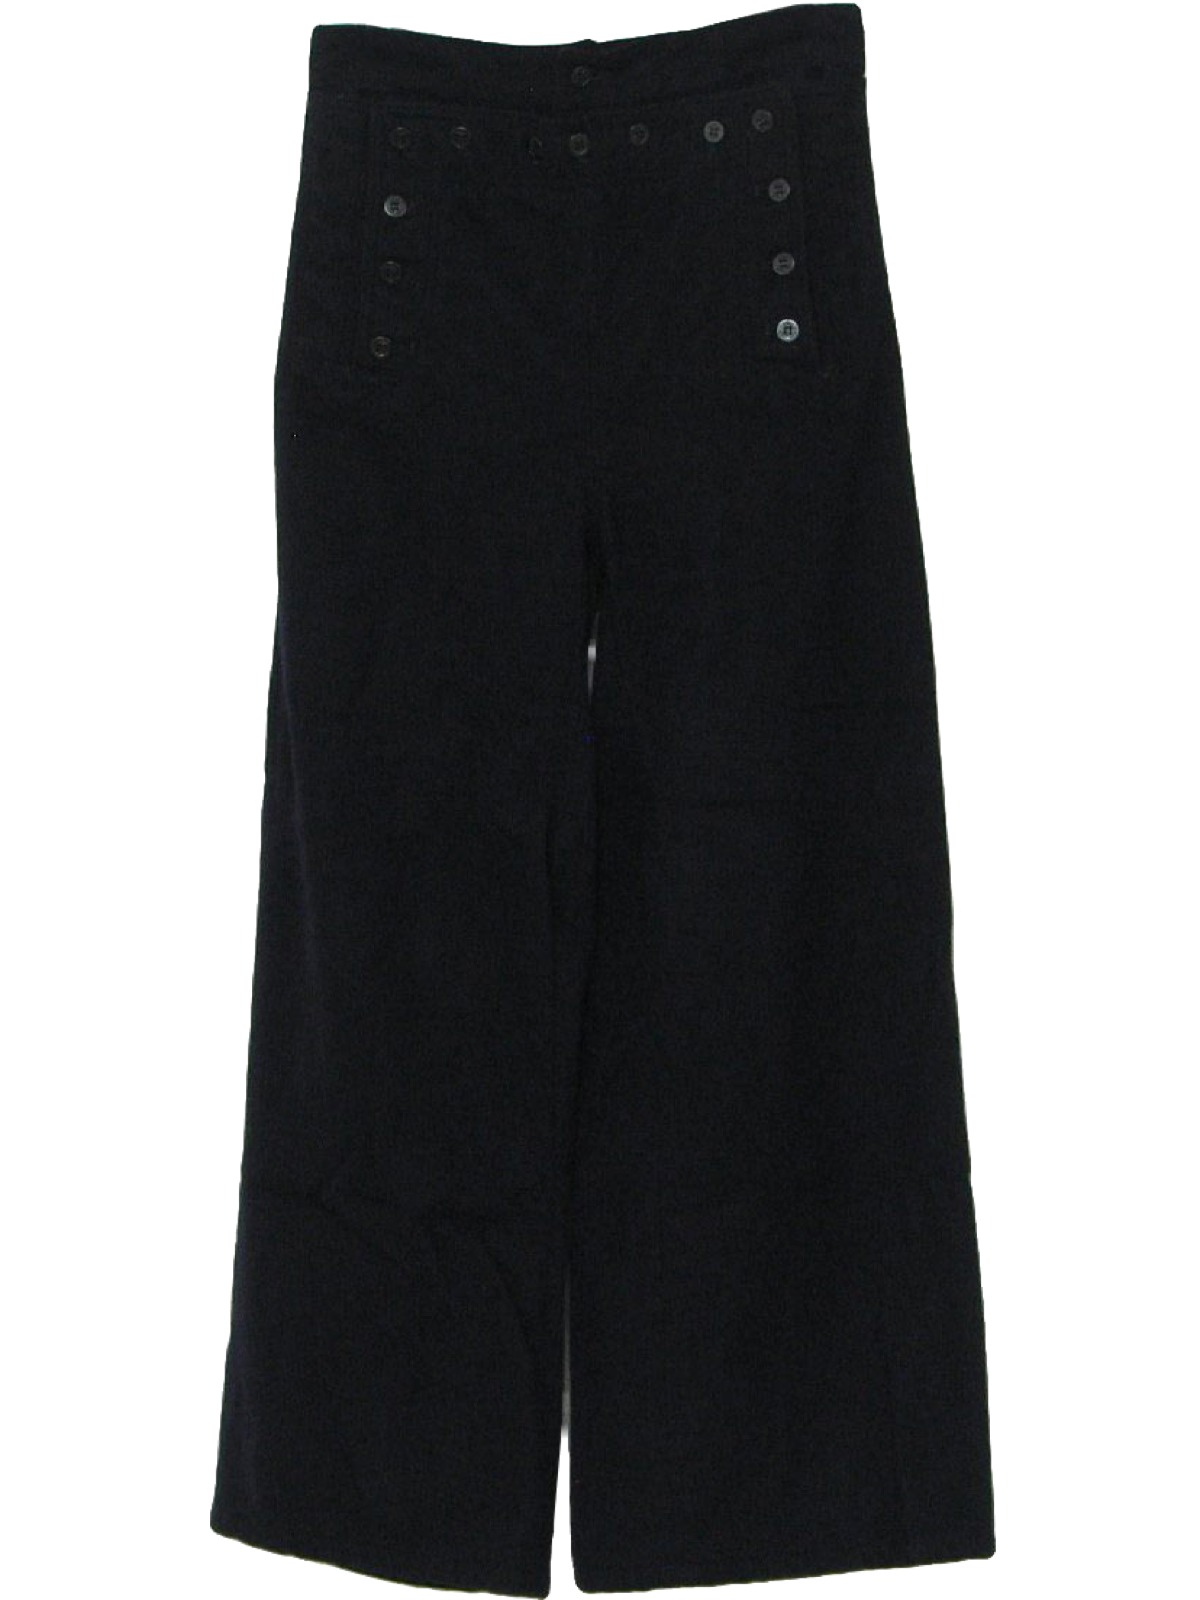 Vintage Navy Issue 60's Bellbottom Pants: 60s -Navy Issue- Mens ...